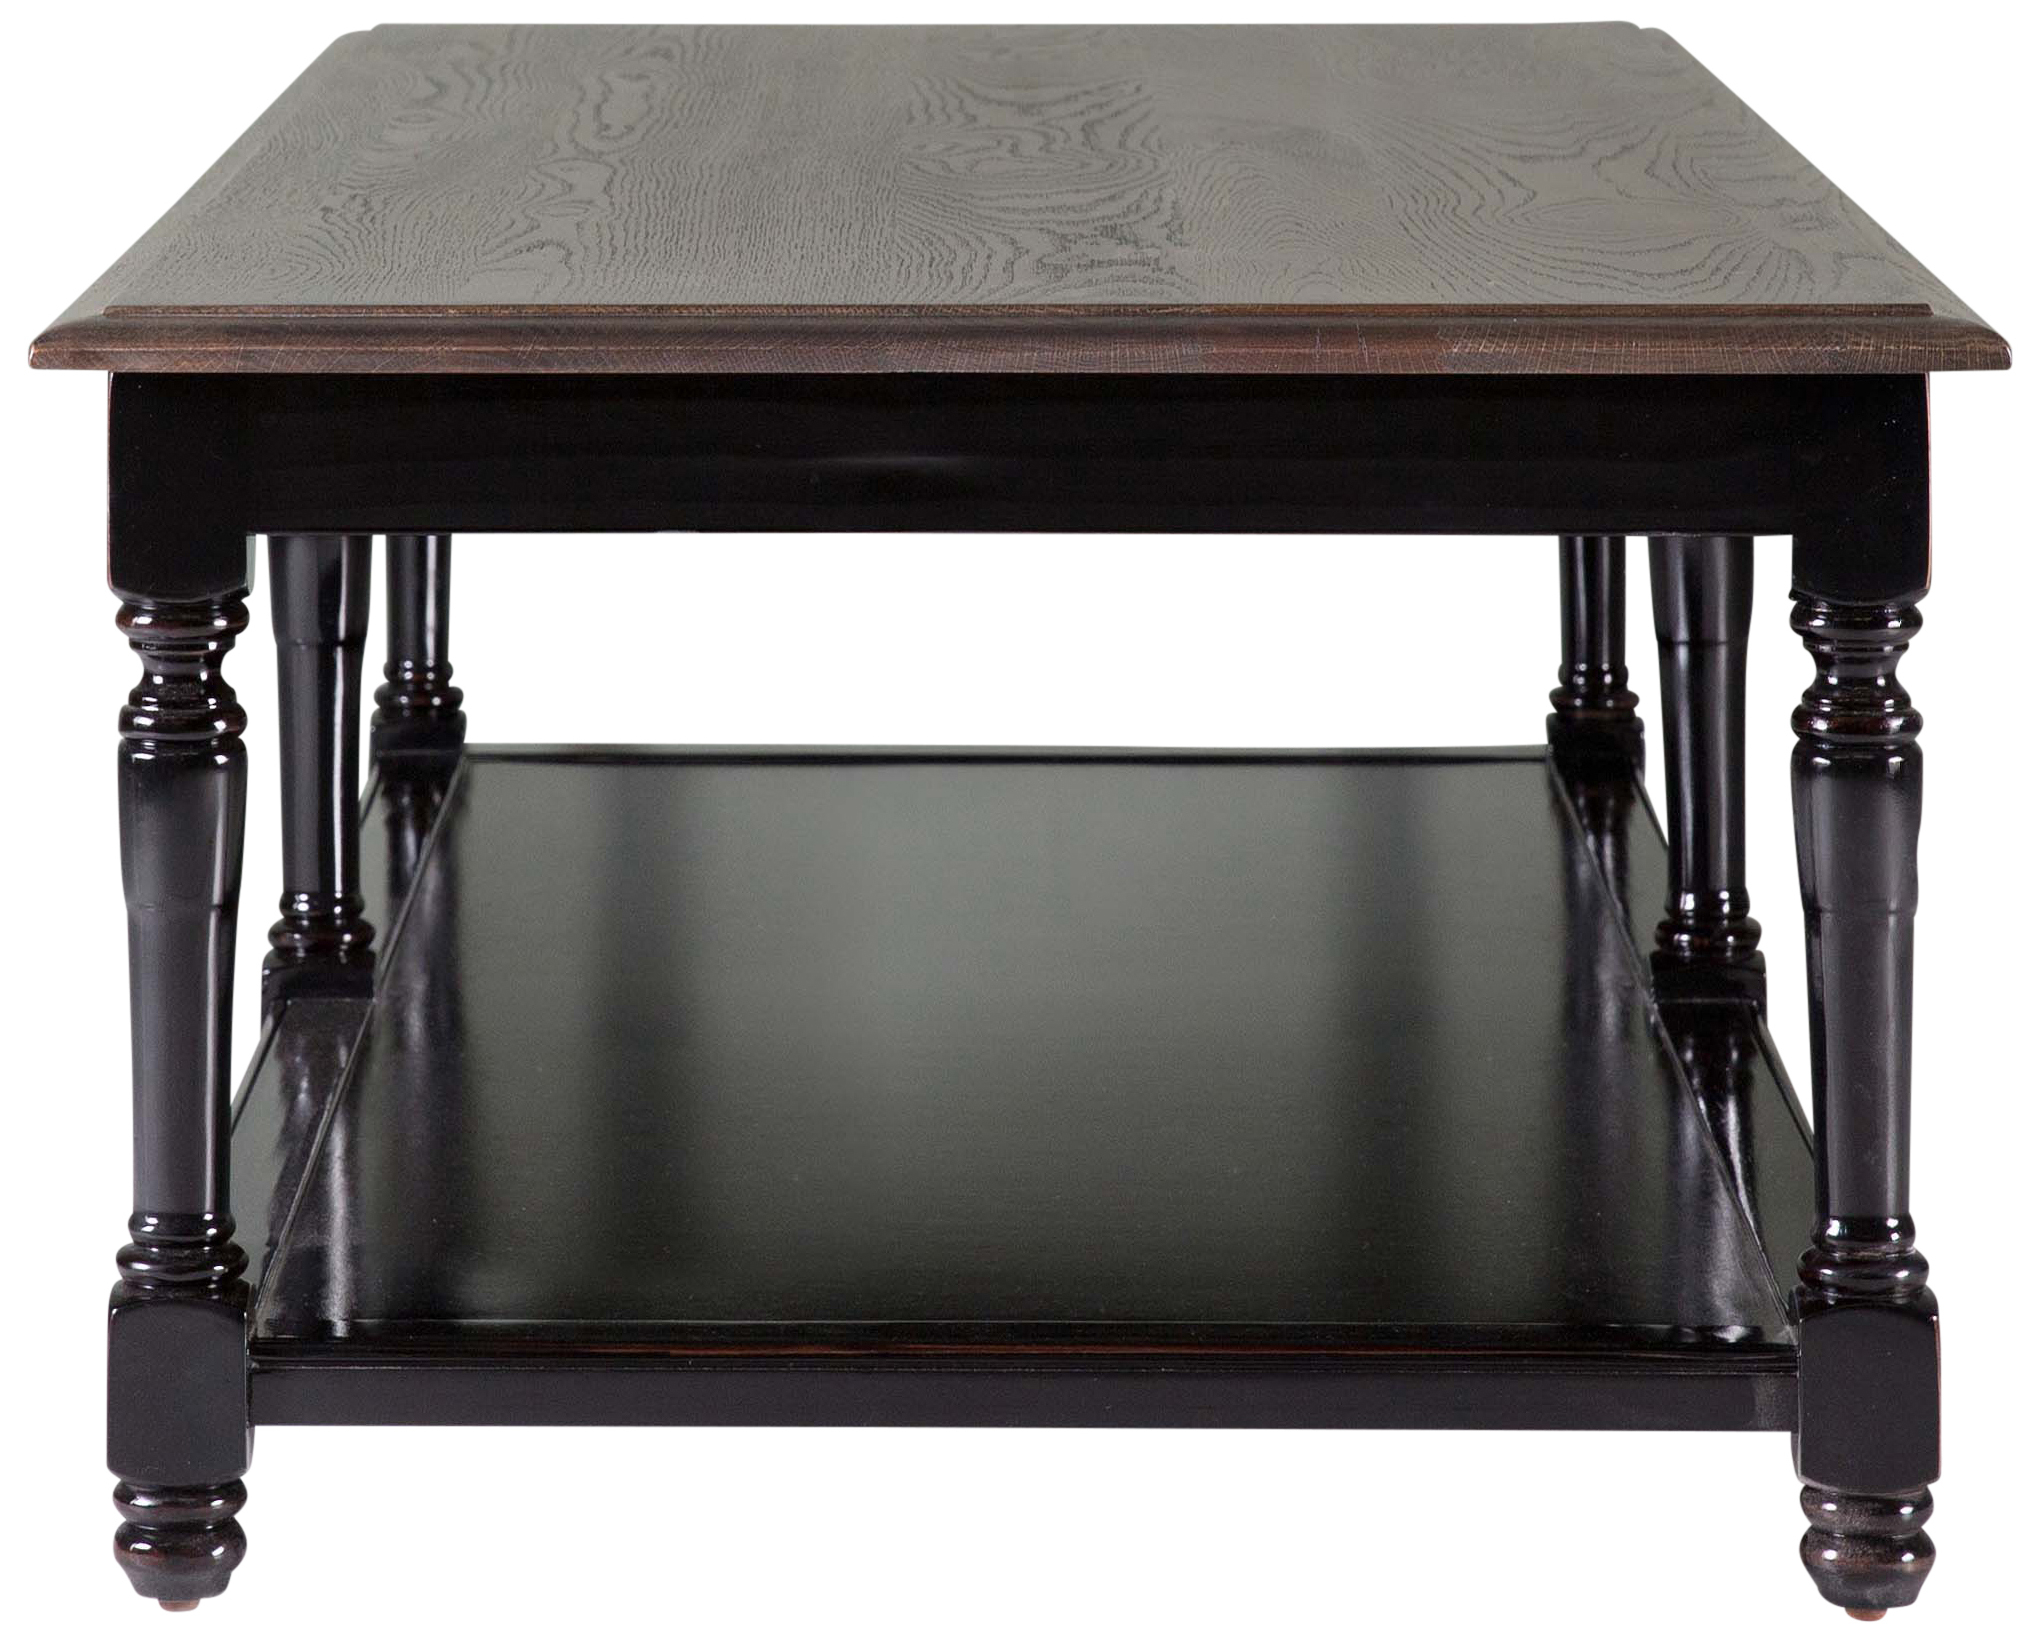 Block & Chisel weathered oak coffee table with black base